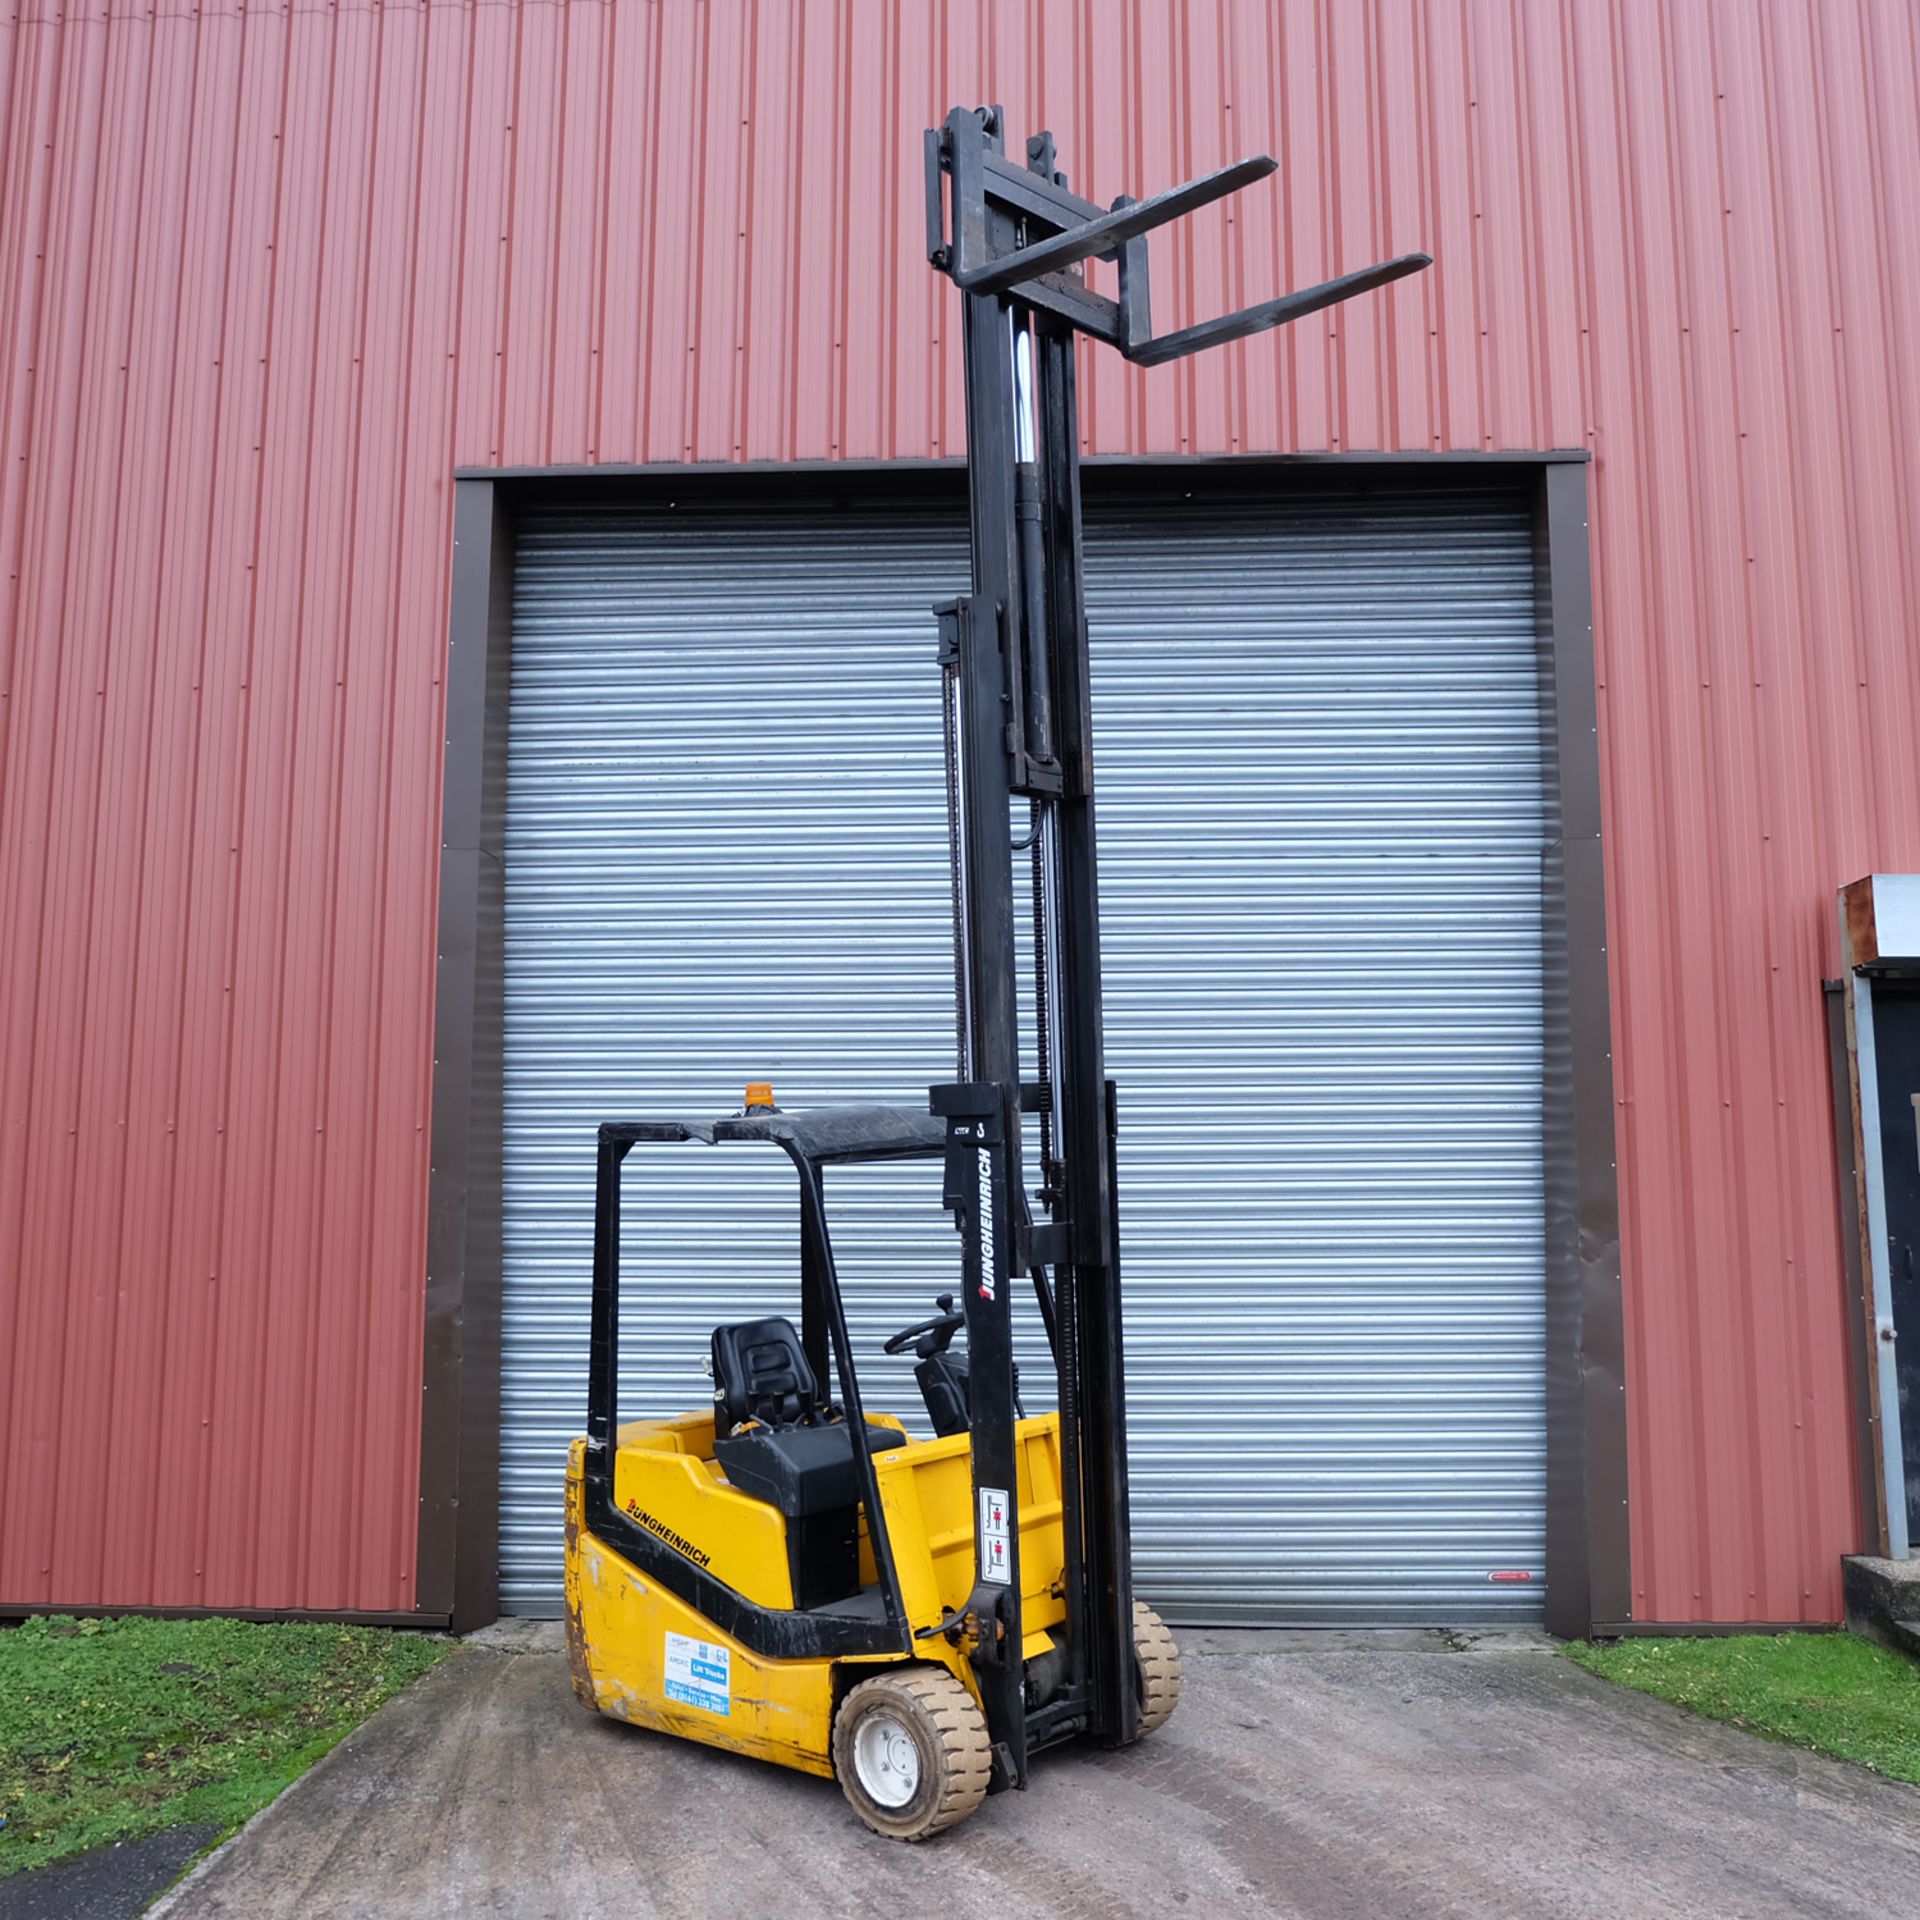 Jungheinrich 3 Wheel Electric Forklift Truck with Associated Charger. (1997) - Image 3 of 16